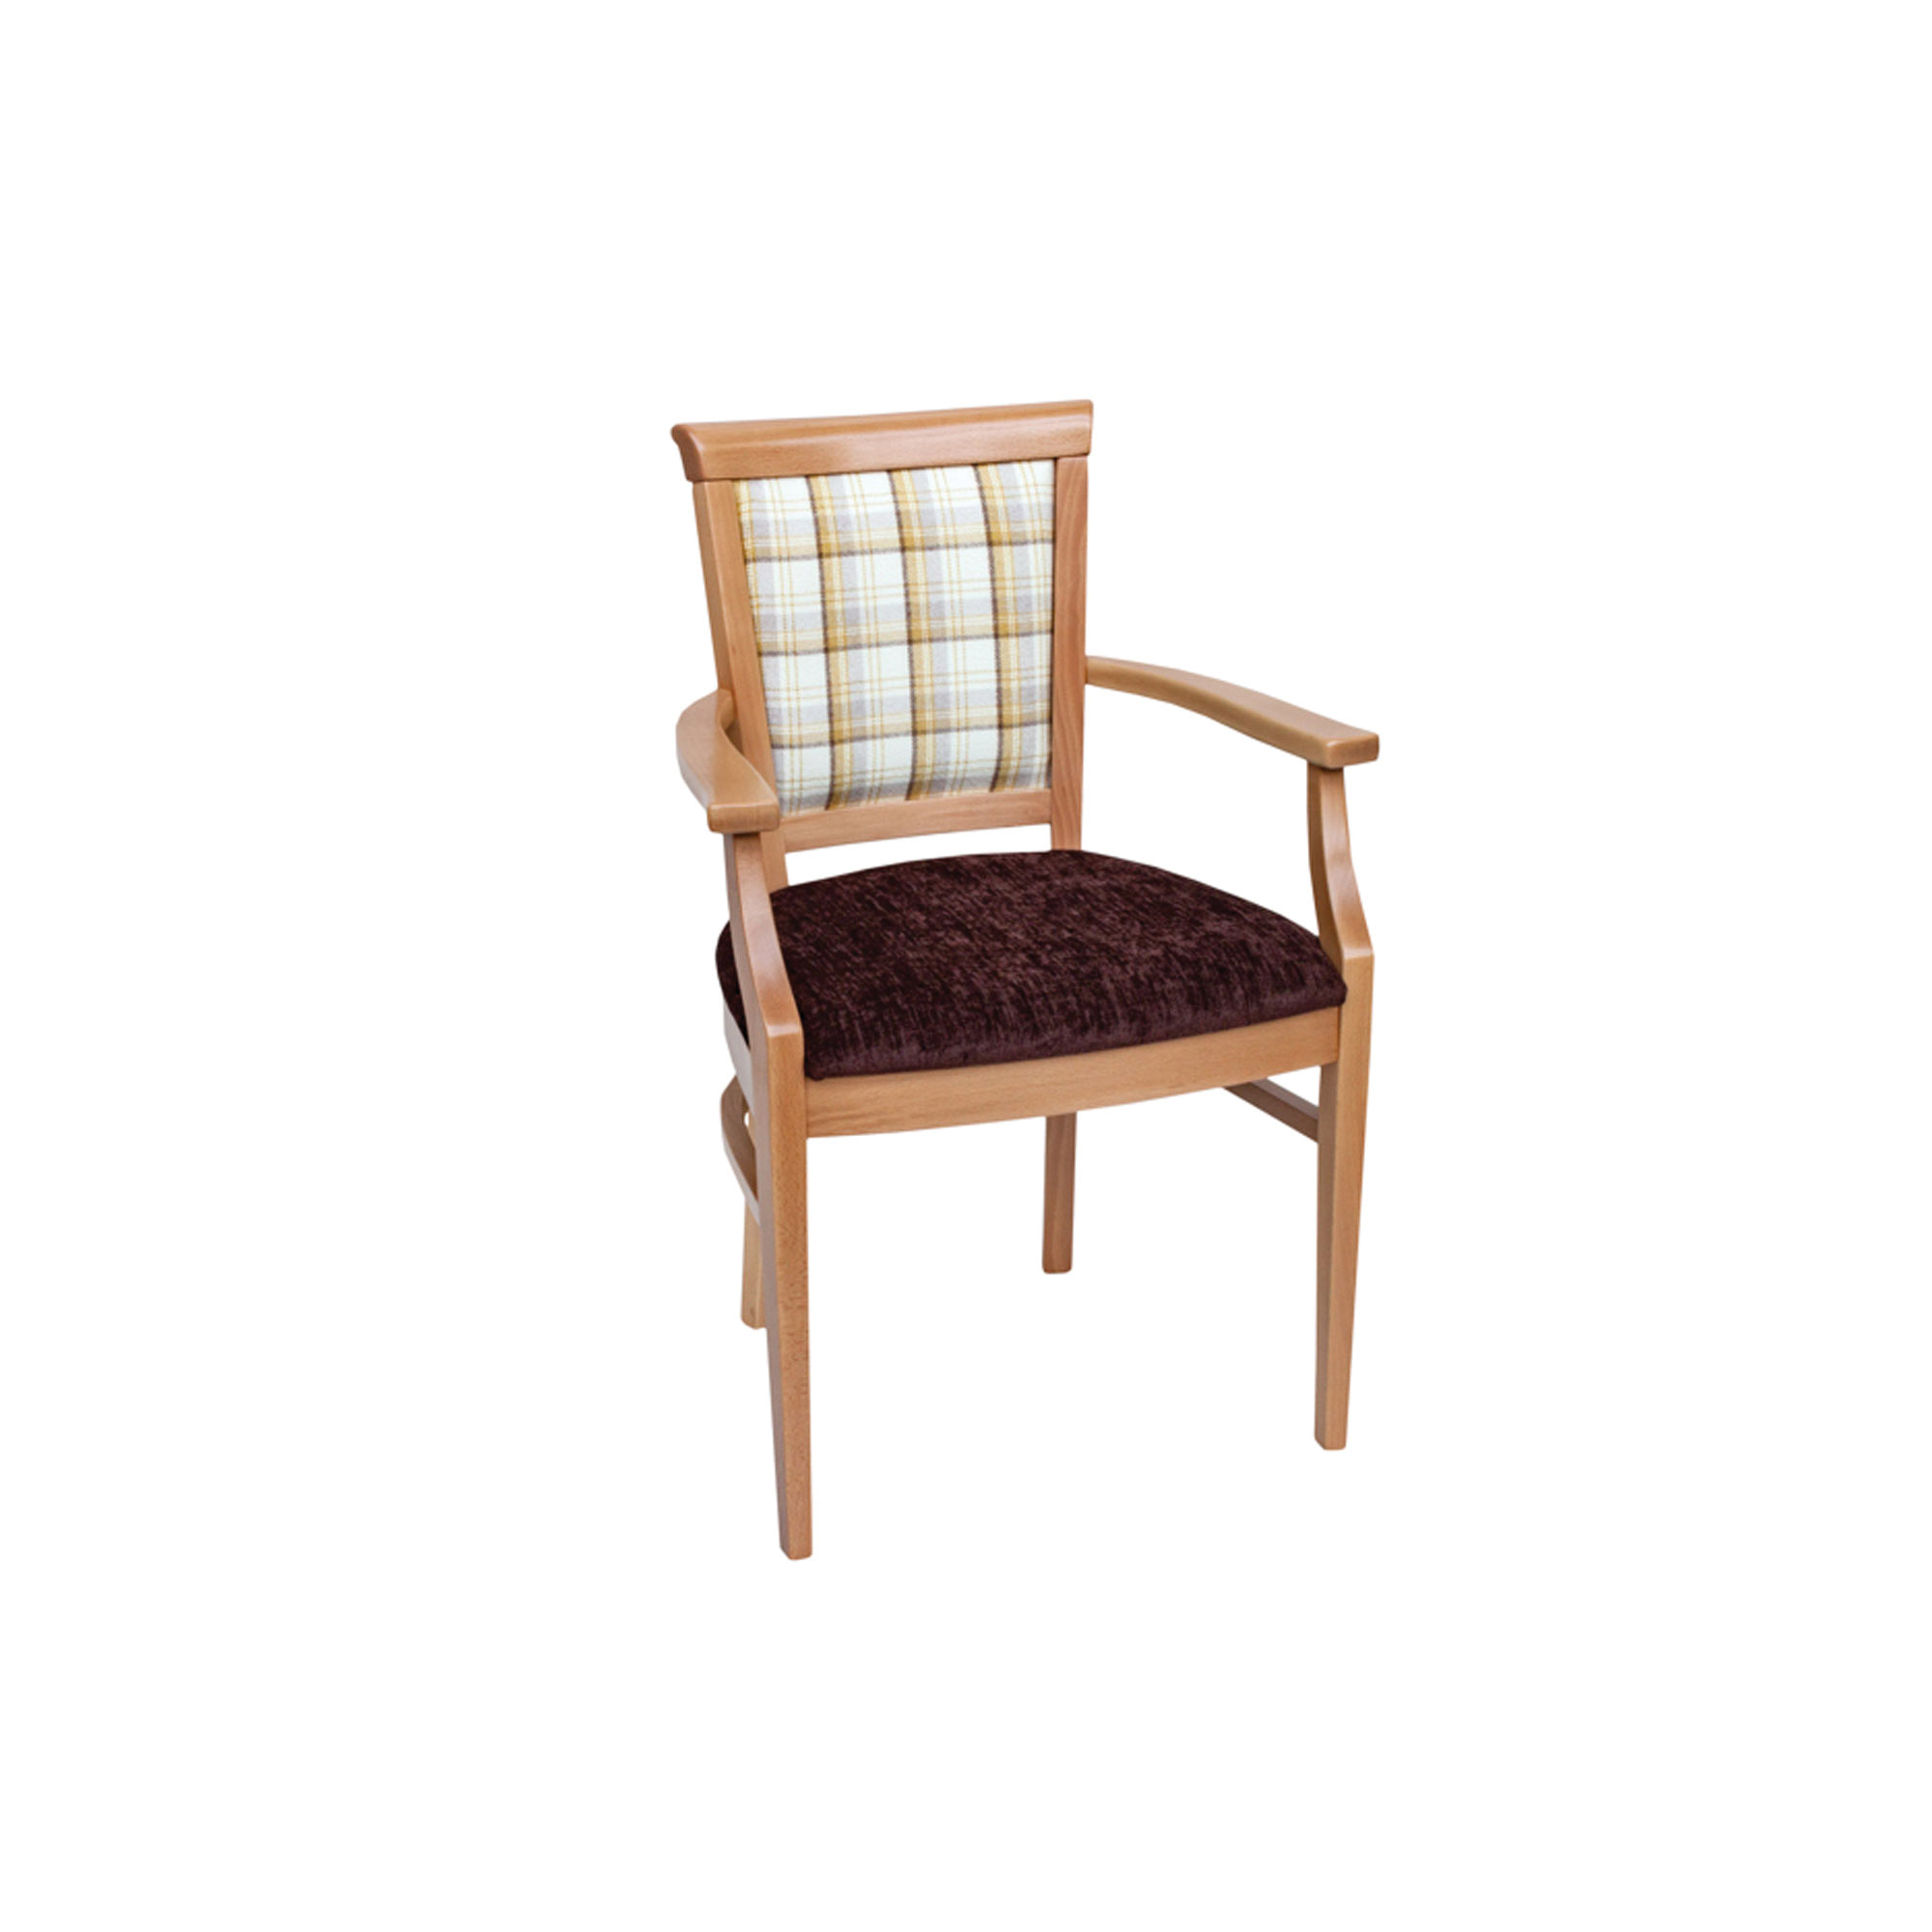 Irwin Chair with Arms C Range